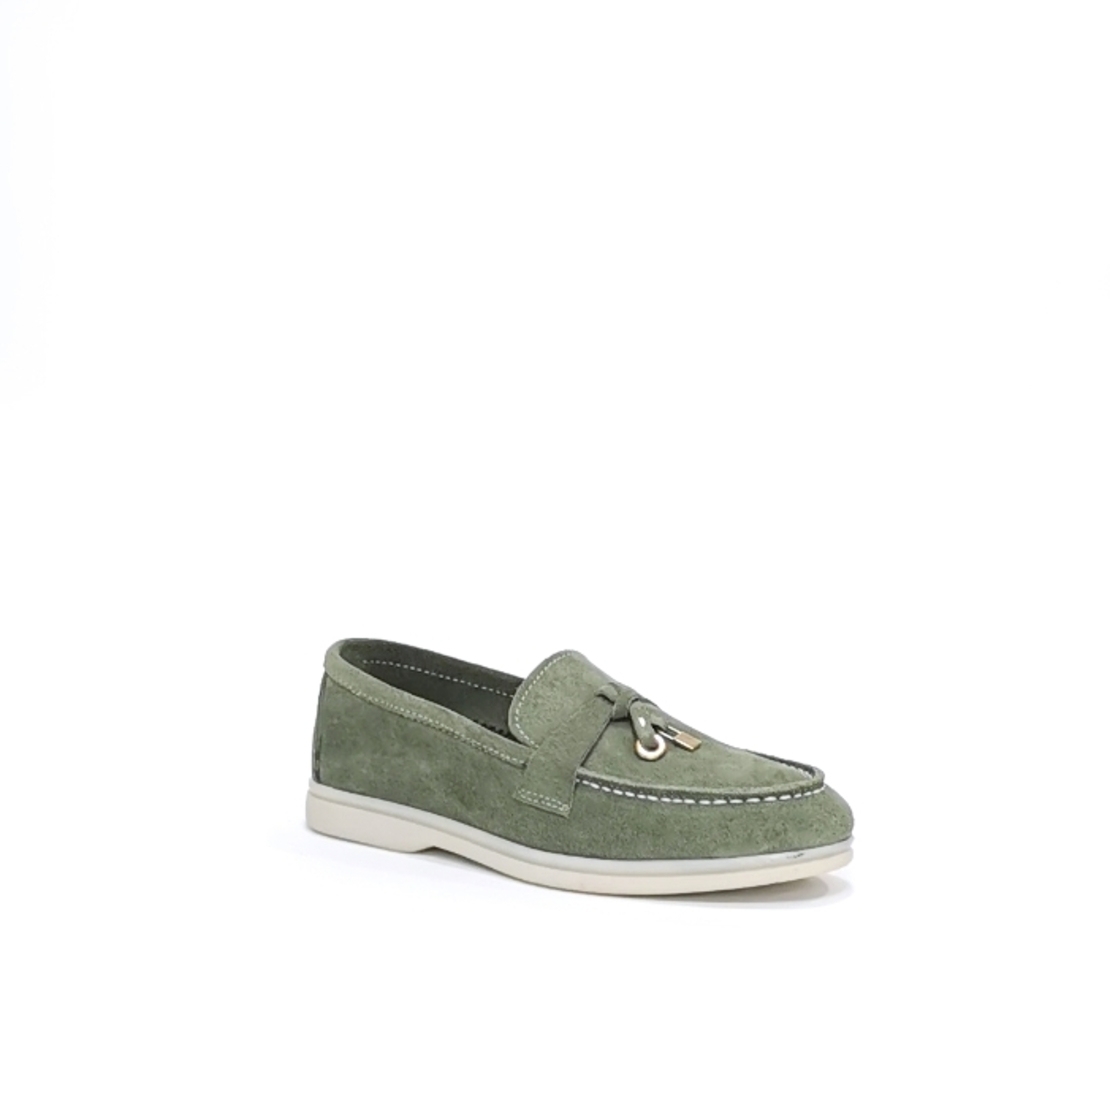 Women's moccasins / loafers / made of natural leather in the color green/7750